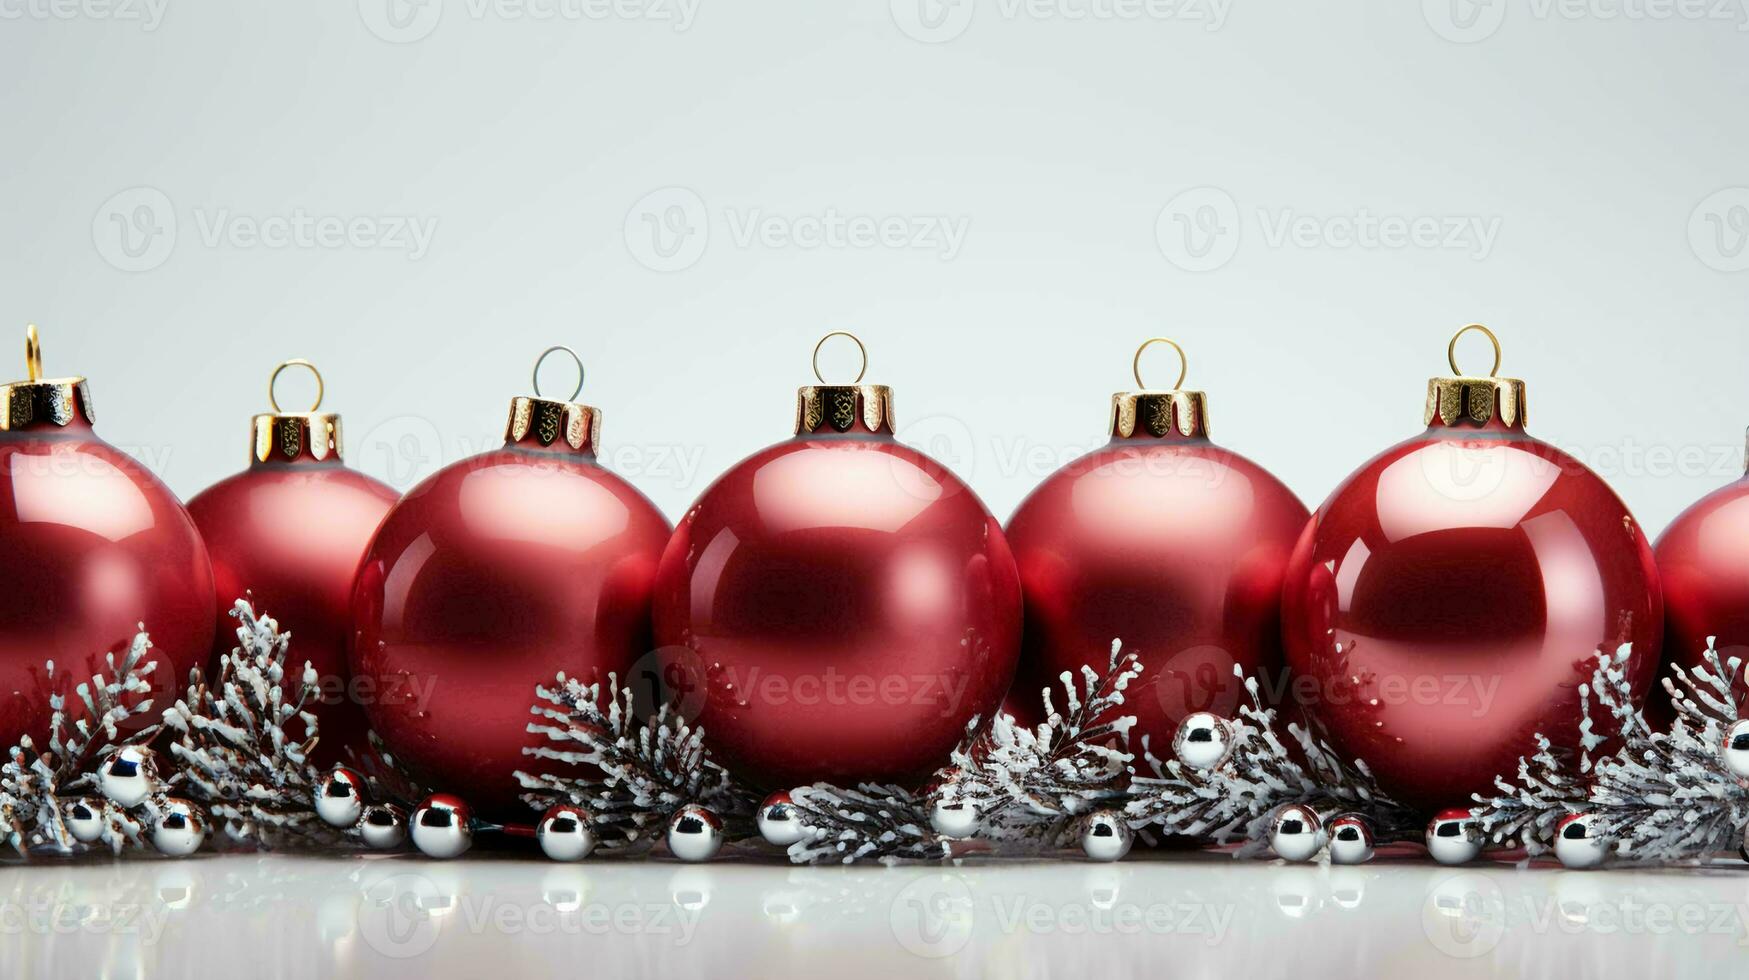 Christmas New Year holiday decorations toys and Christmas decorations balls, background photo